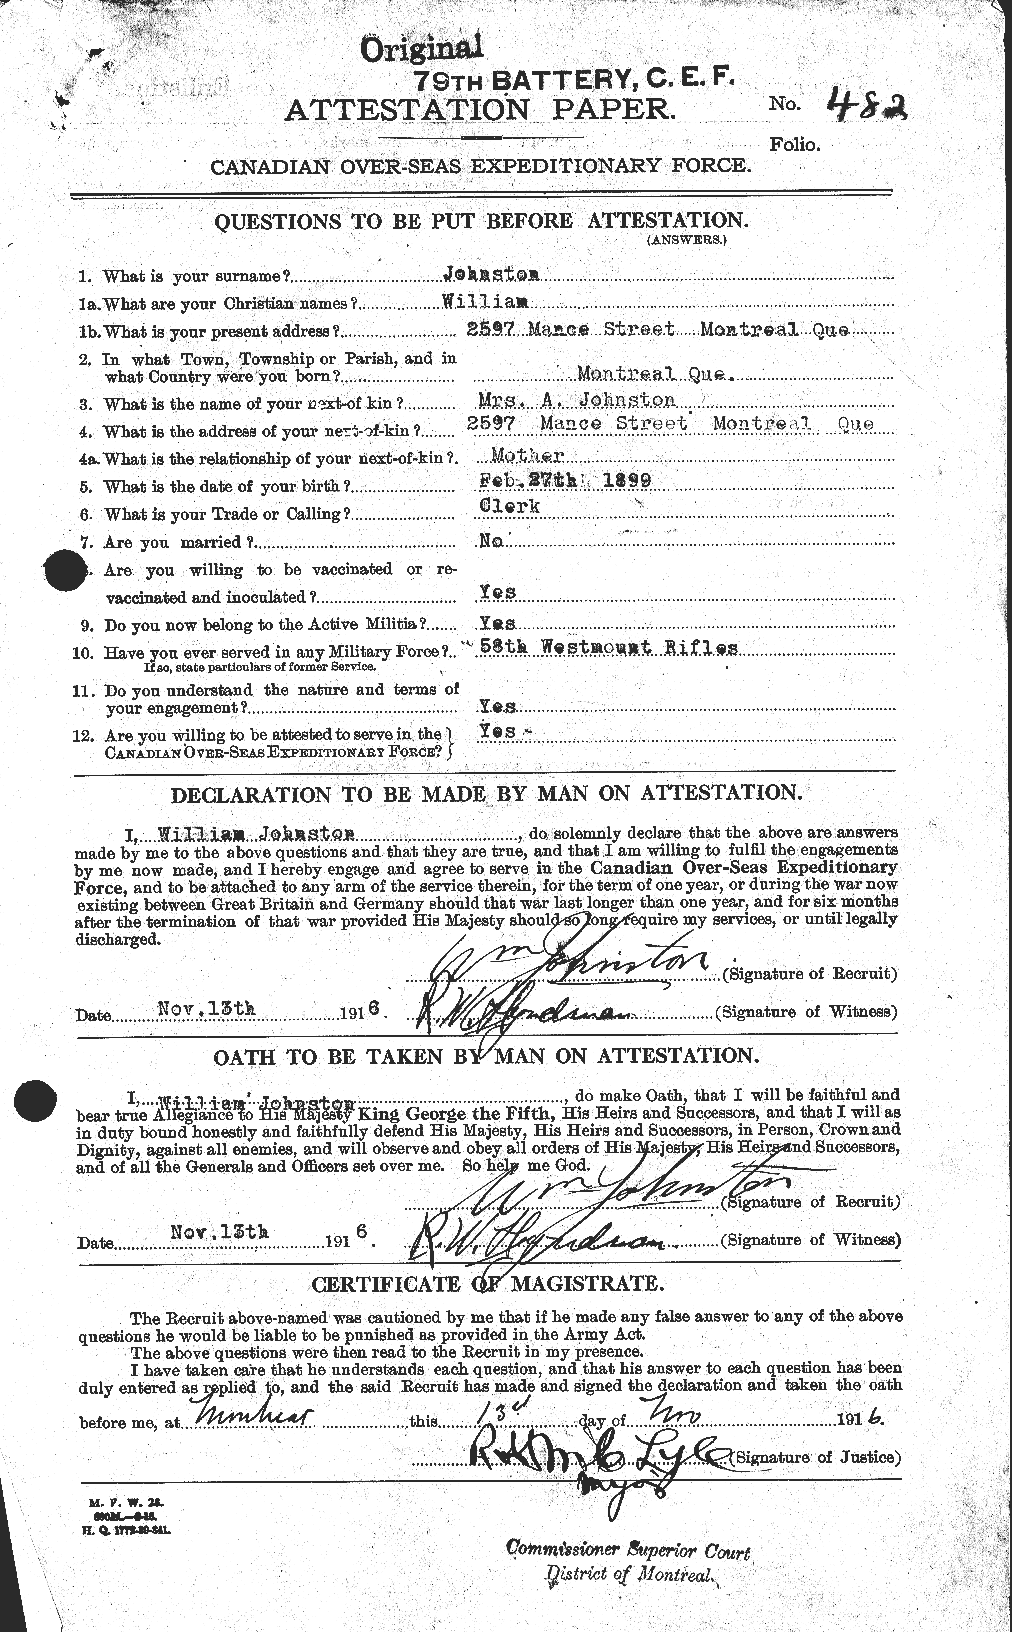 Personnel Records of the First World War - CEF 427244a